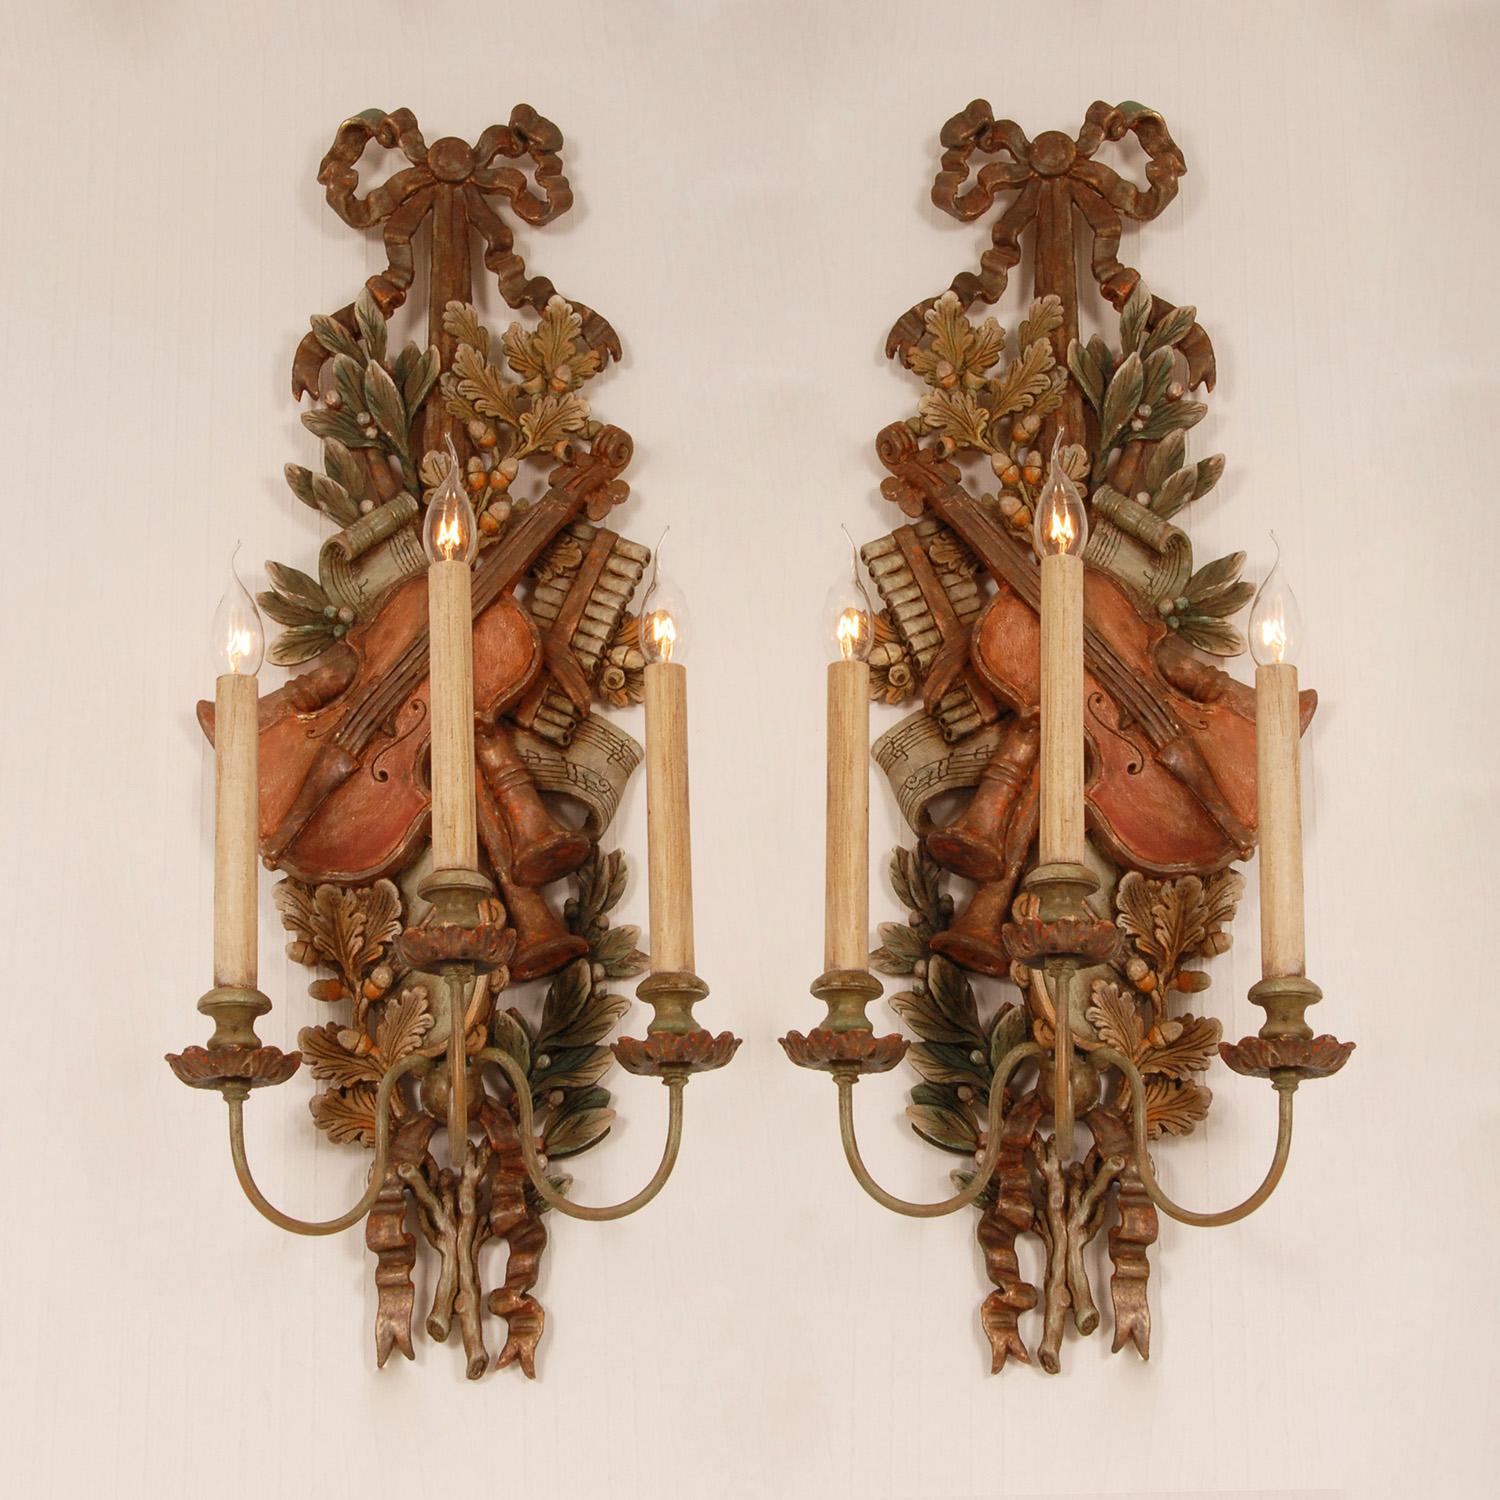 Tall Italian carved sconces, polychrome painted in soft colors.
Material: Linden wood
Styles: Italian, French, Louis XVI, Antique, Neoclassical, French Provincial, French Country, Vintage
Origin: Italy, 1960s
A pair three light electrified carved